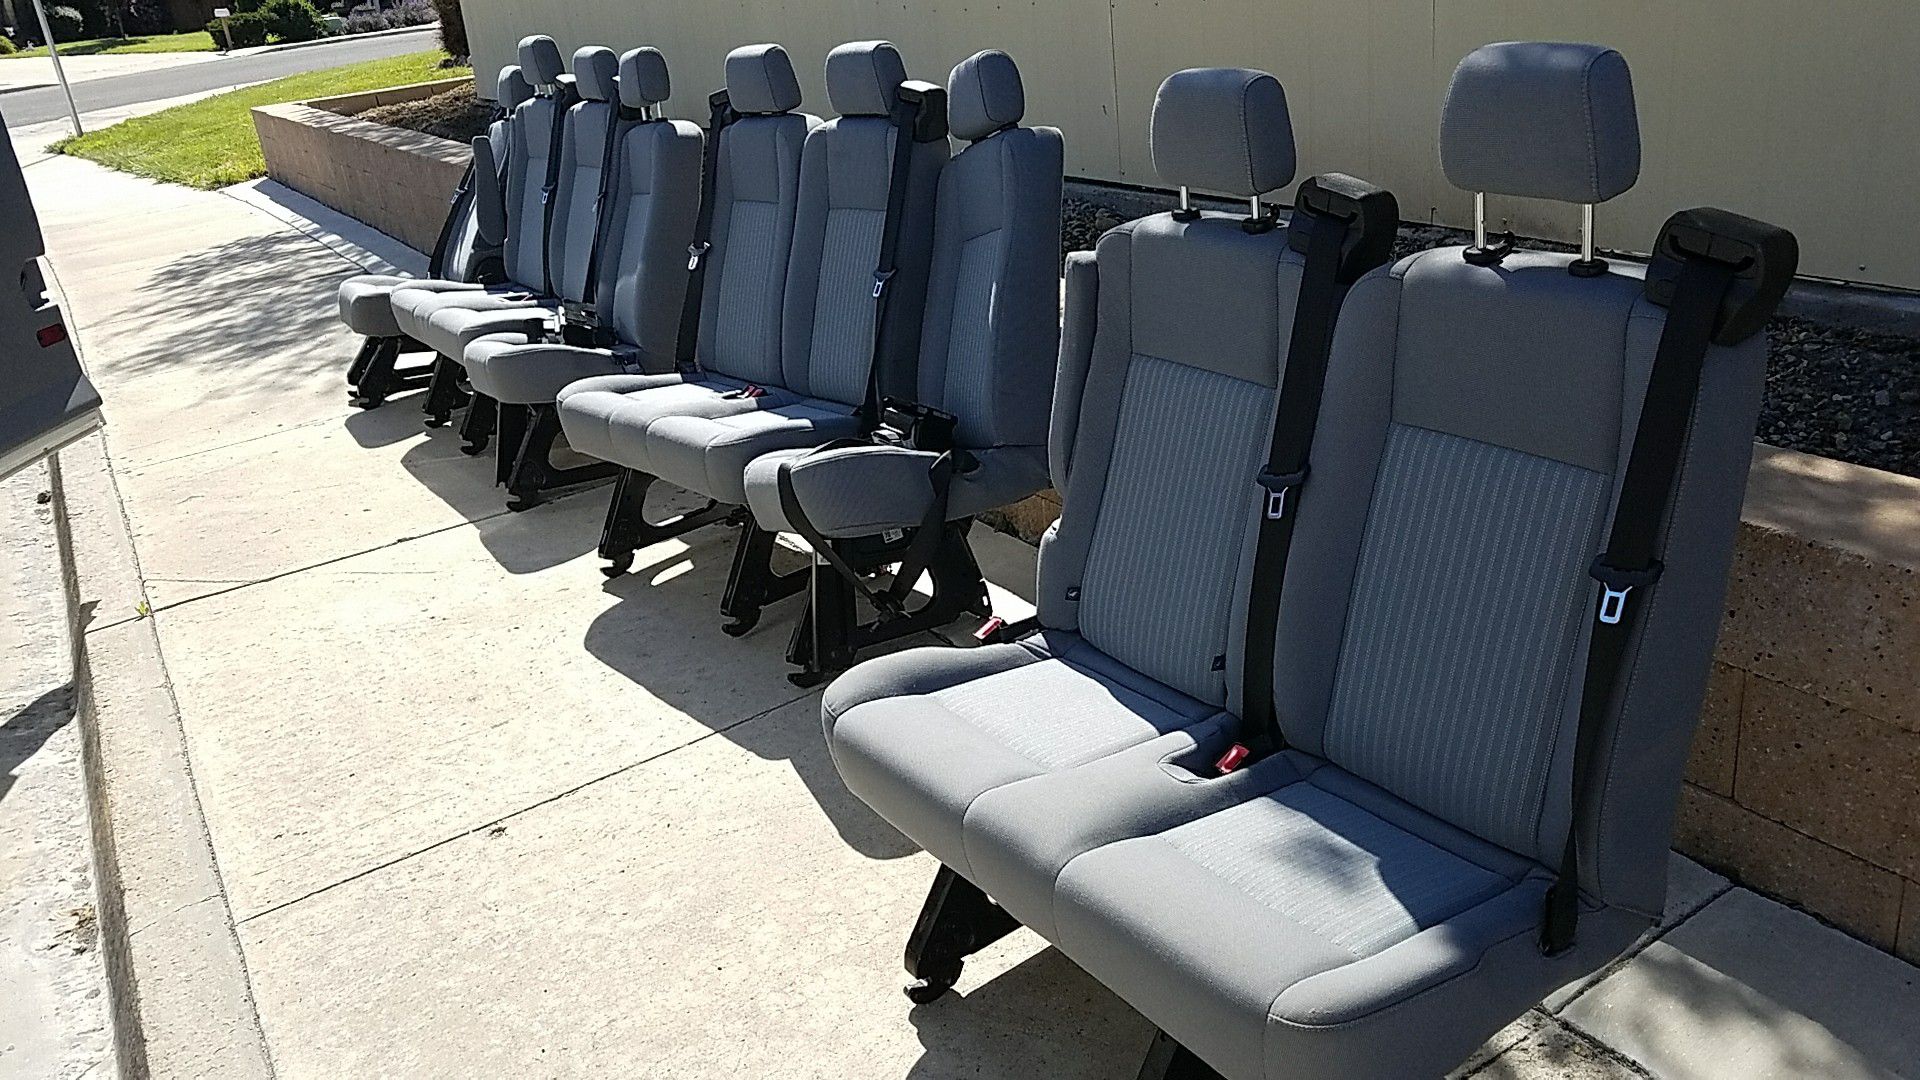 2016 ford transit 350 seats. I don't have the brackets from the van. We are using them